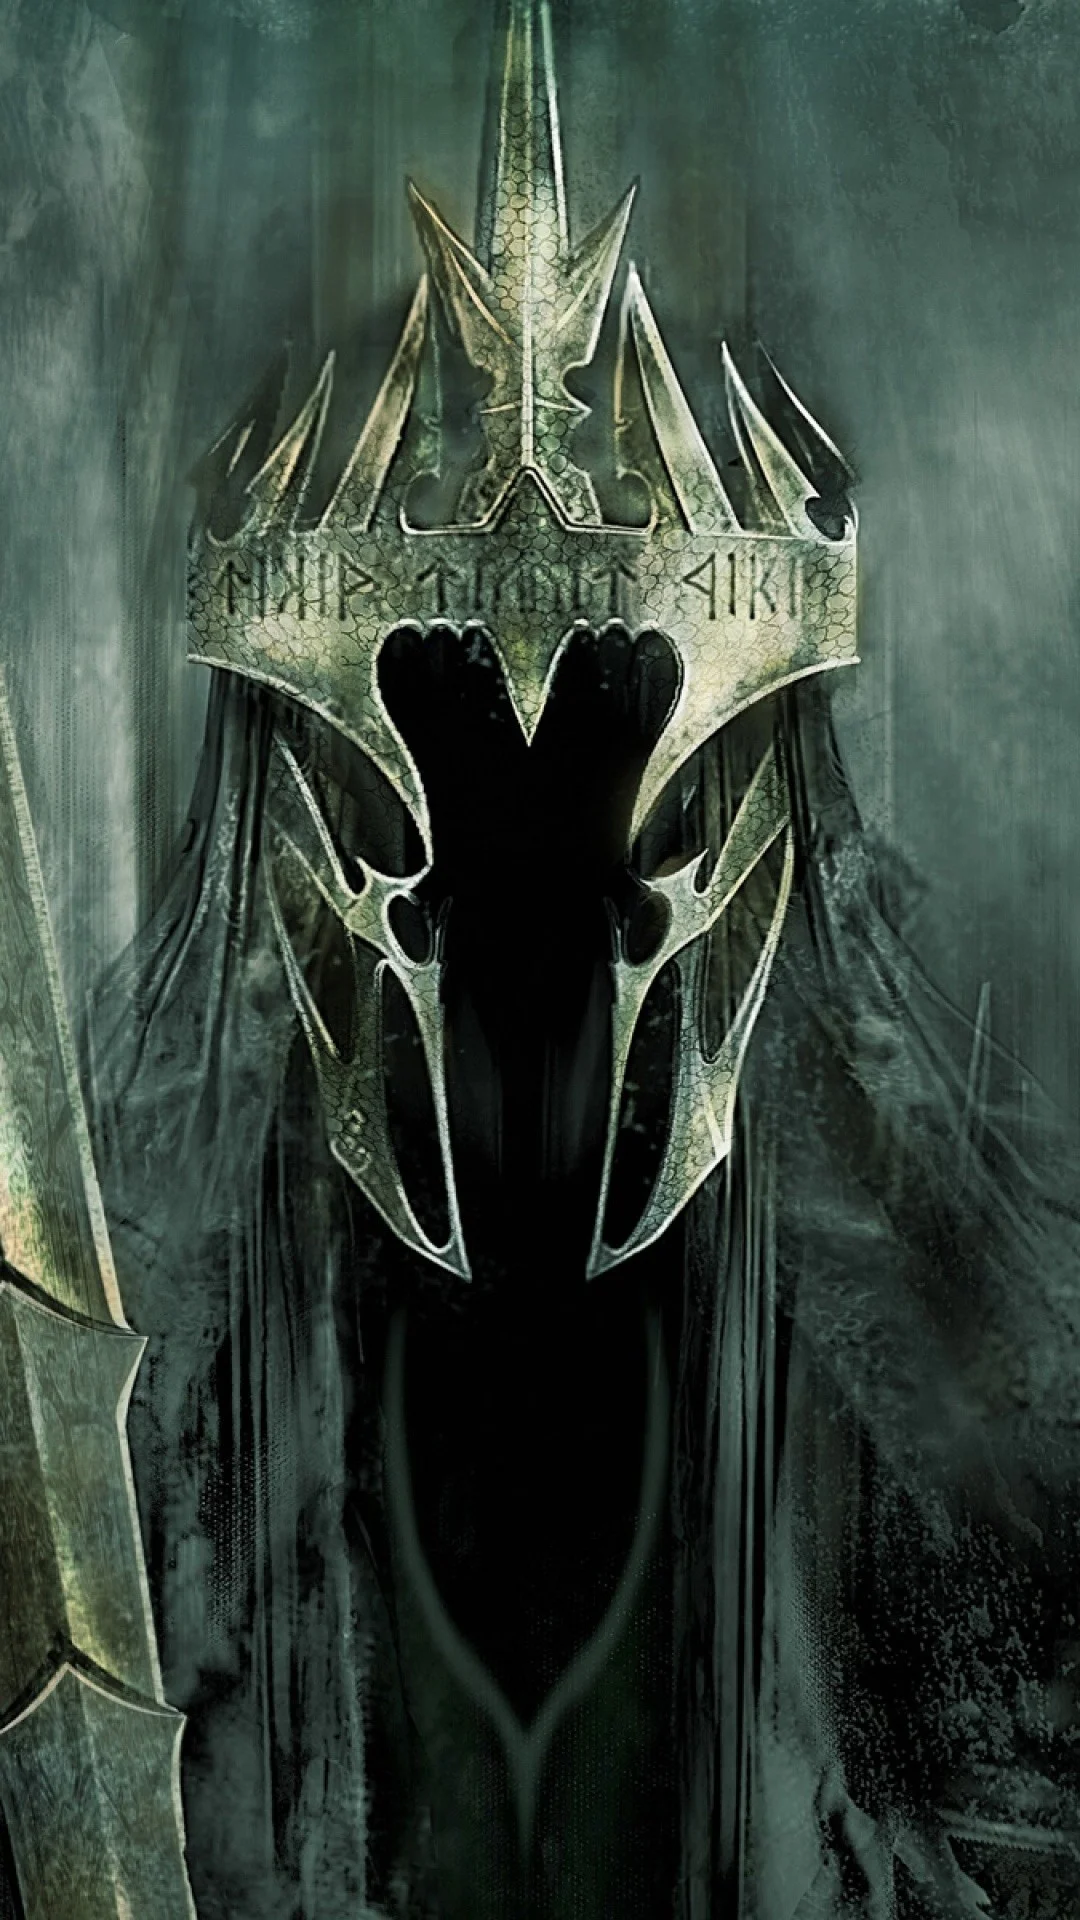 Nazgul Lord of the Rings